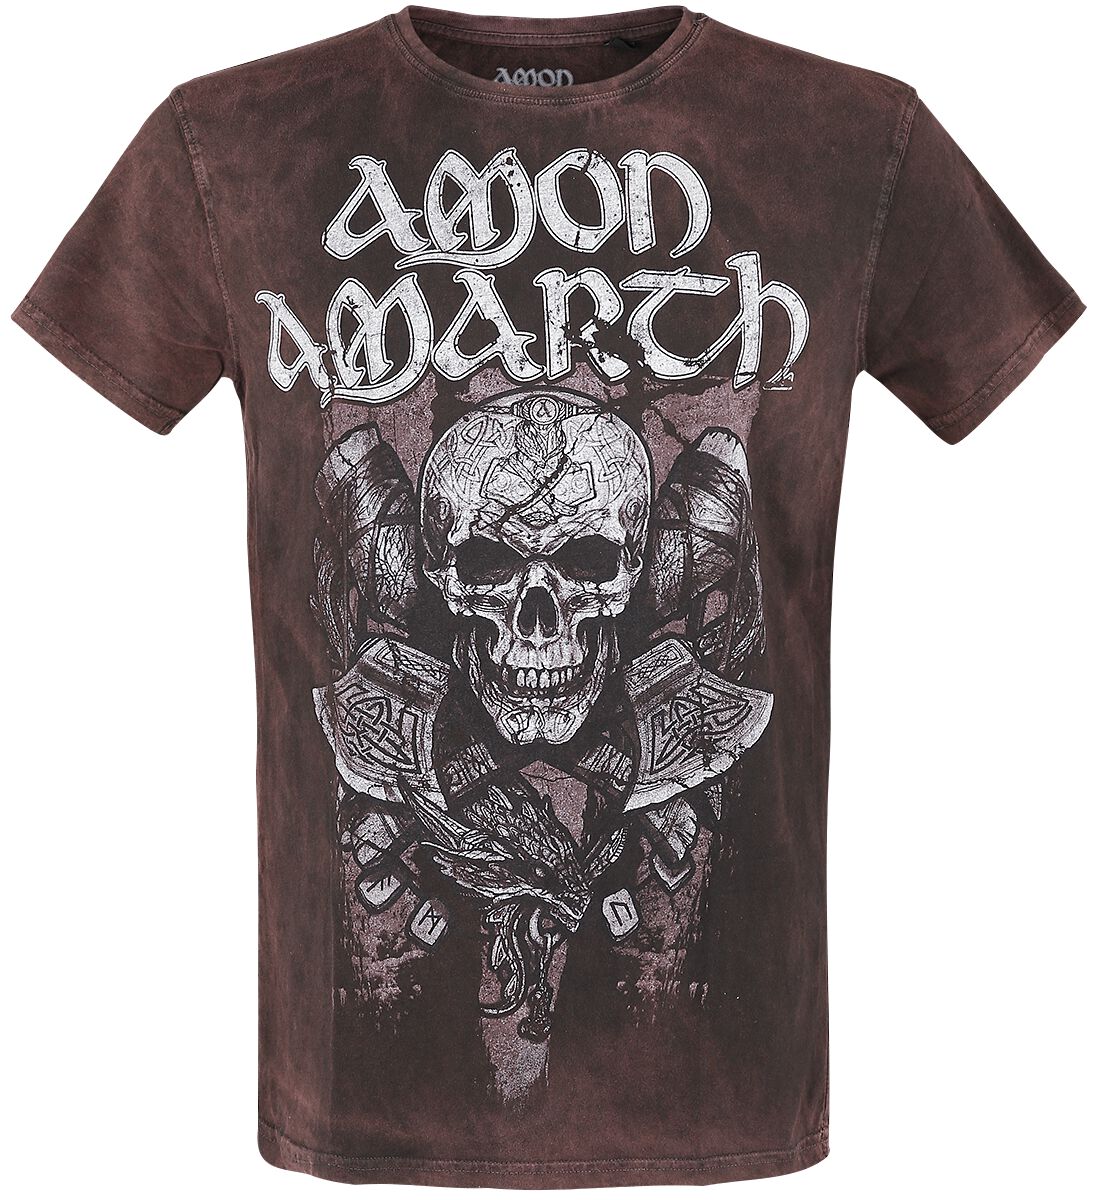 Carved Skull Amon Amarth T Shirt Emp In case you have questions about your order. amon amarth